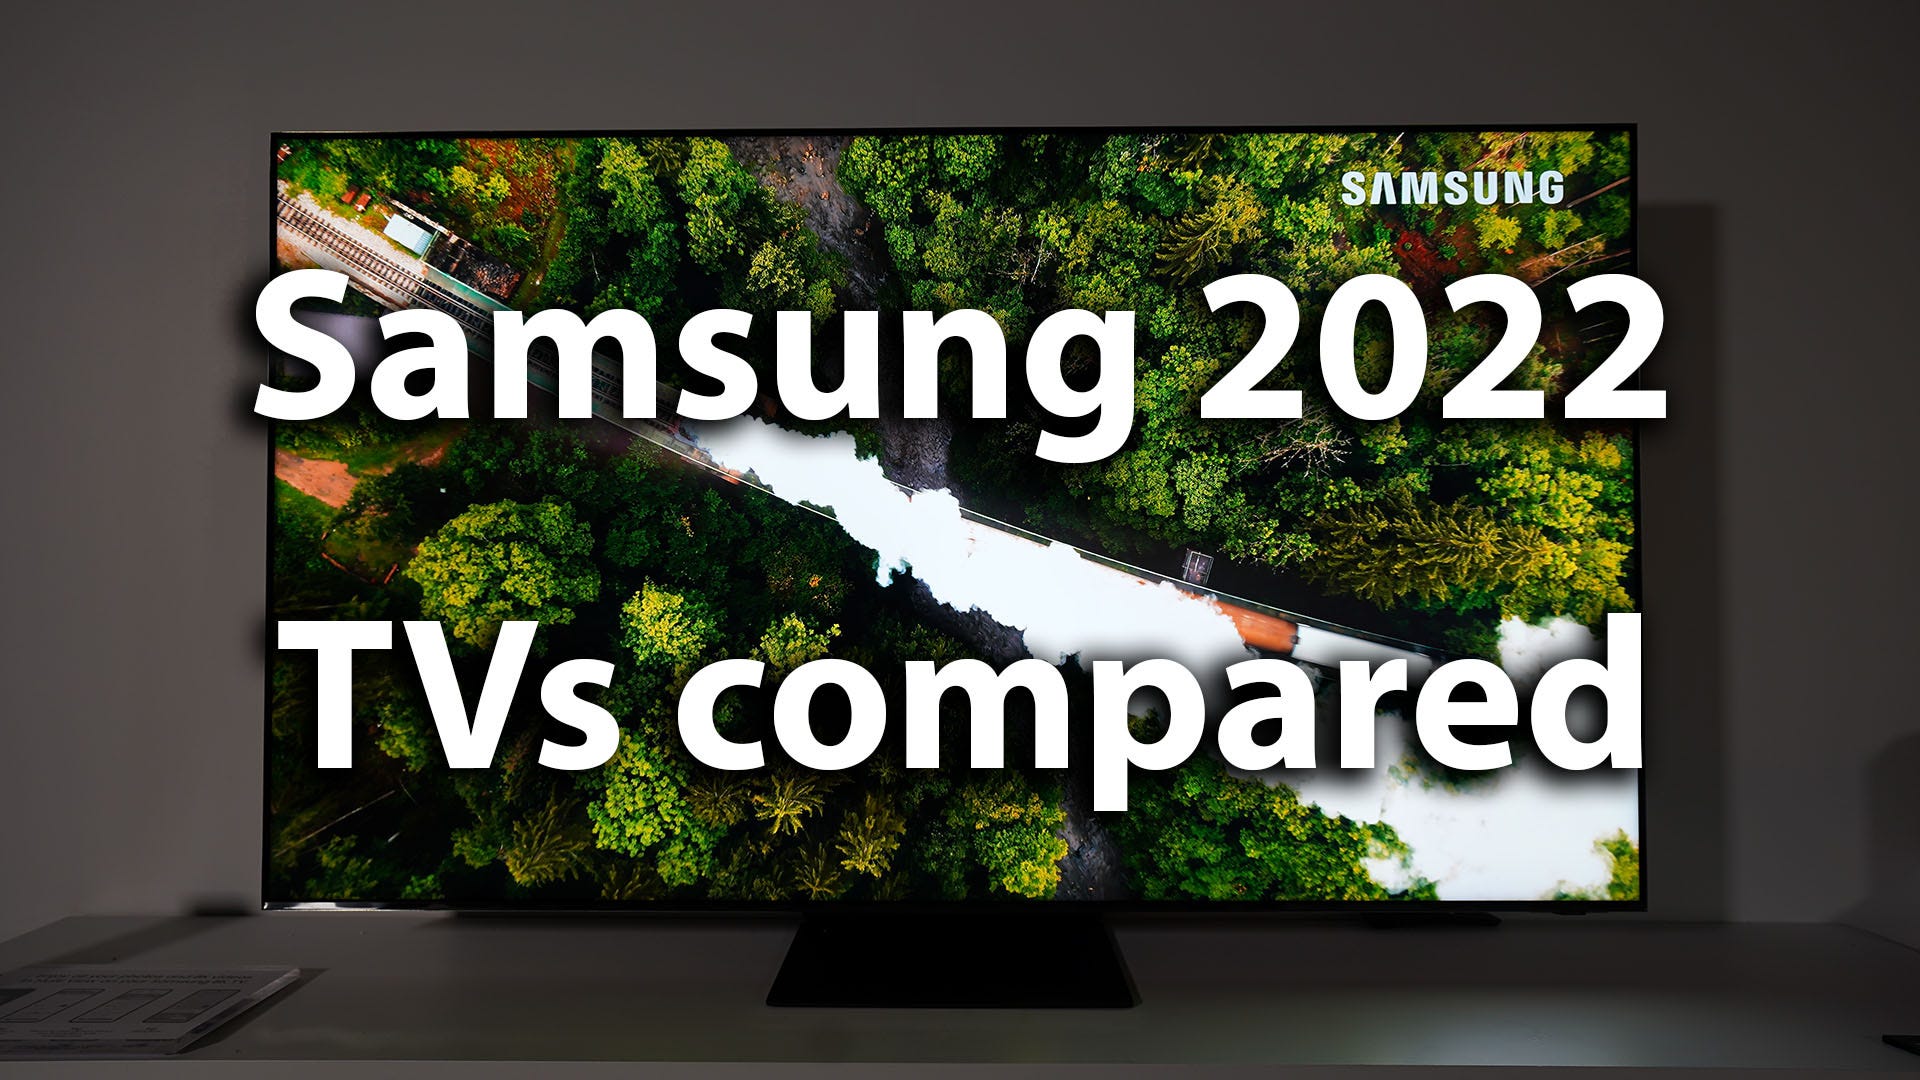 Samsung 2022 TVs compared: Neo QLED, S95B OLED, and The Frame